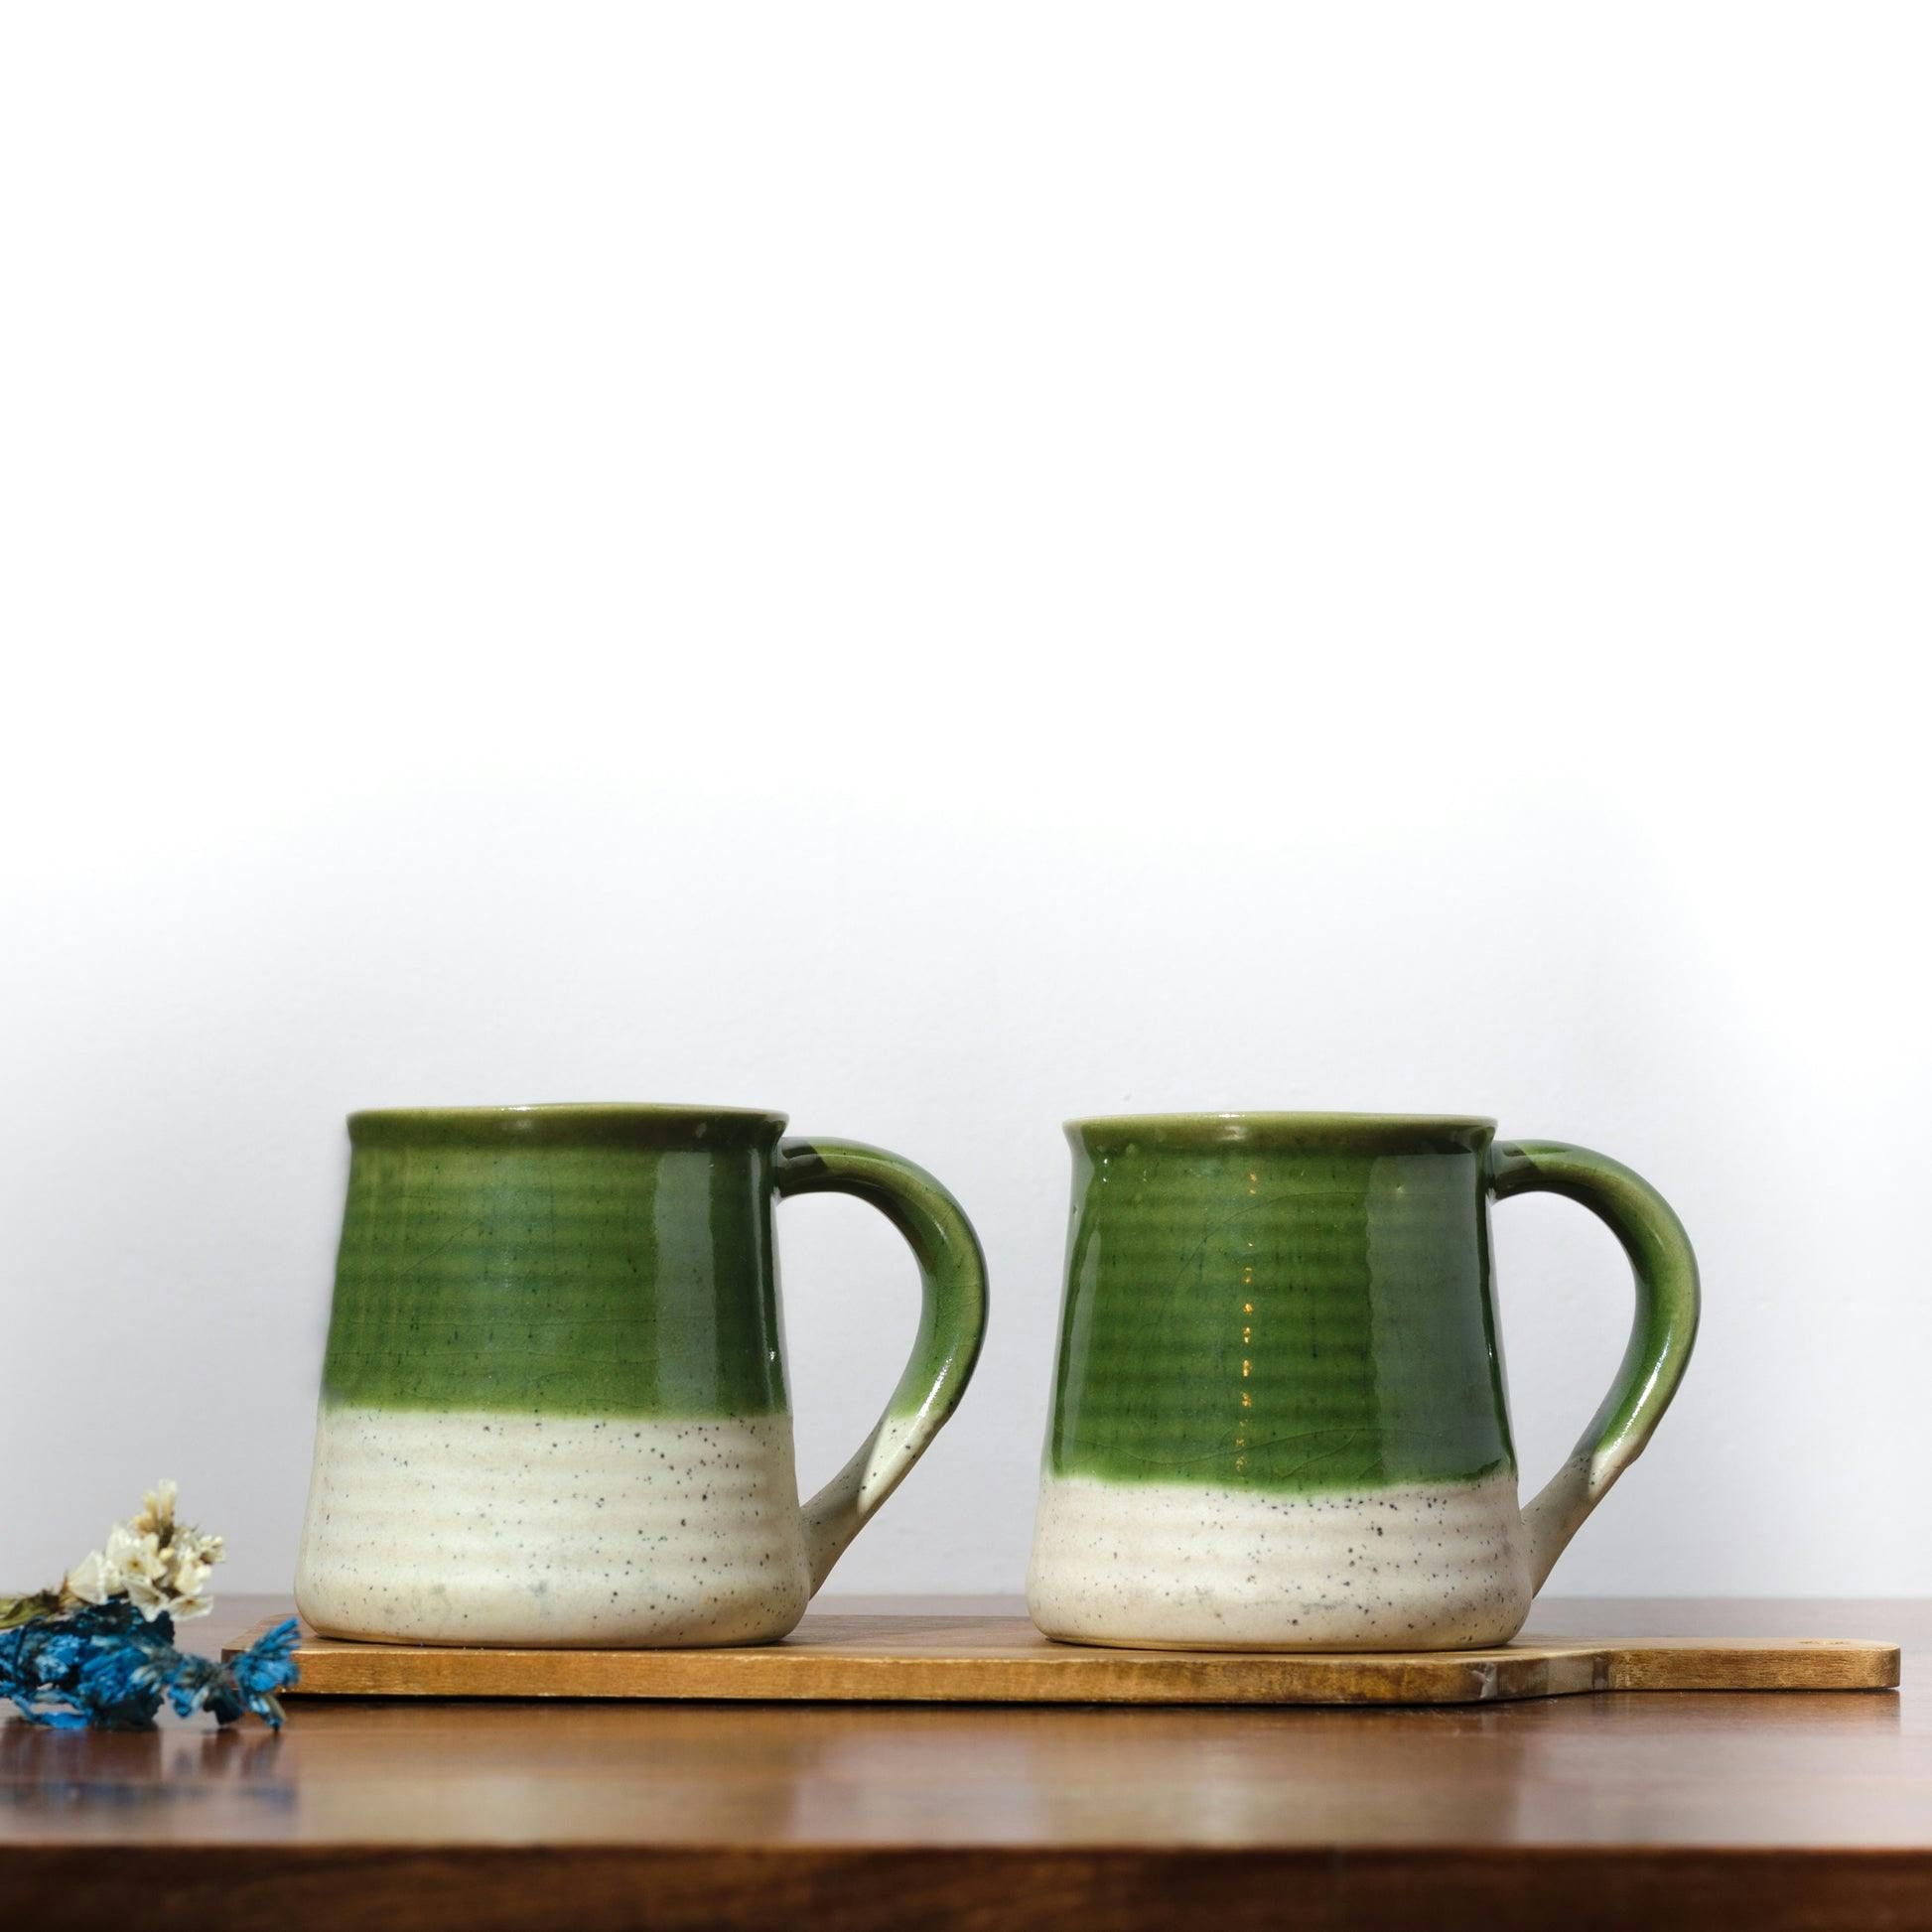 Green Drip Mug - Set of 2, a product by Oh Yay project